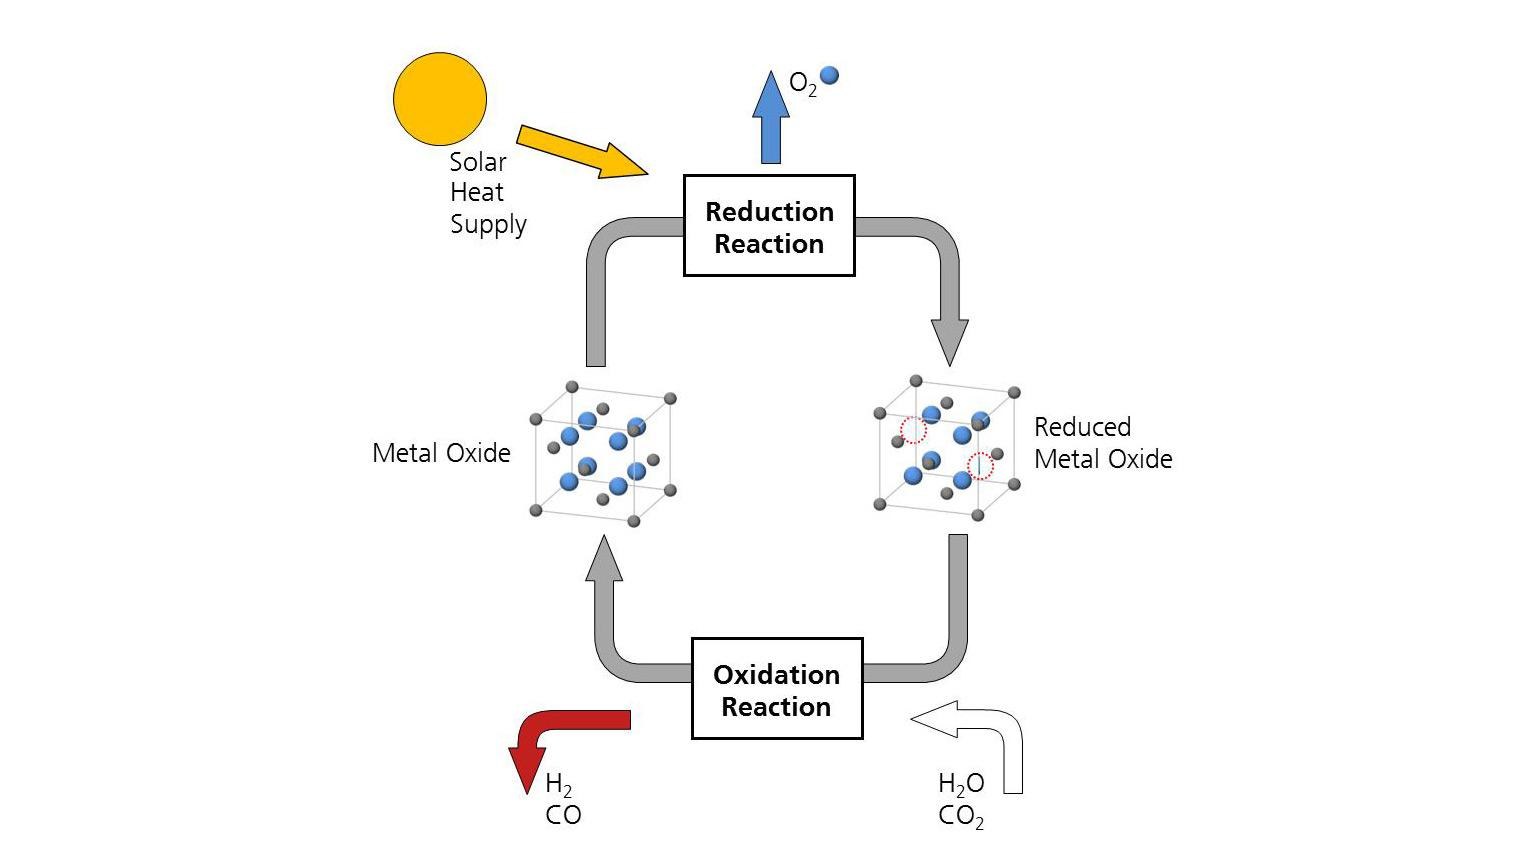 Schematic of a two-step solar thermochemical cycle for H2O/CO2 splitting based on metal oxide redox reactions